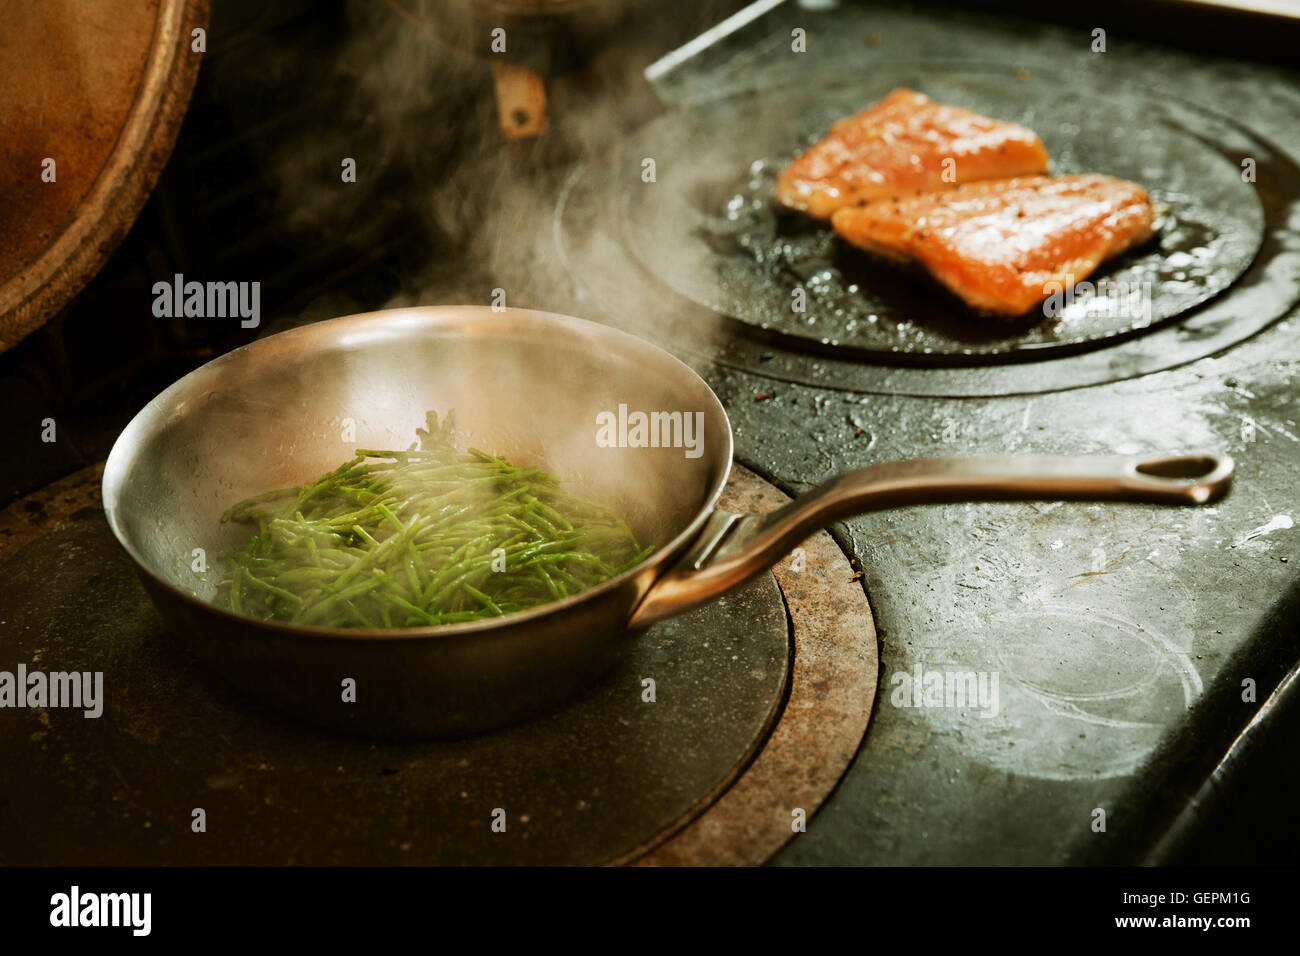 Frying pan with samphire and a fish fillet grilled on a stove. Stock Photo